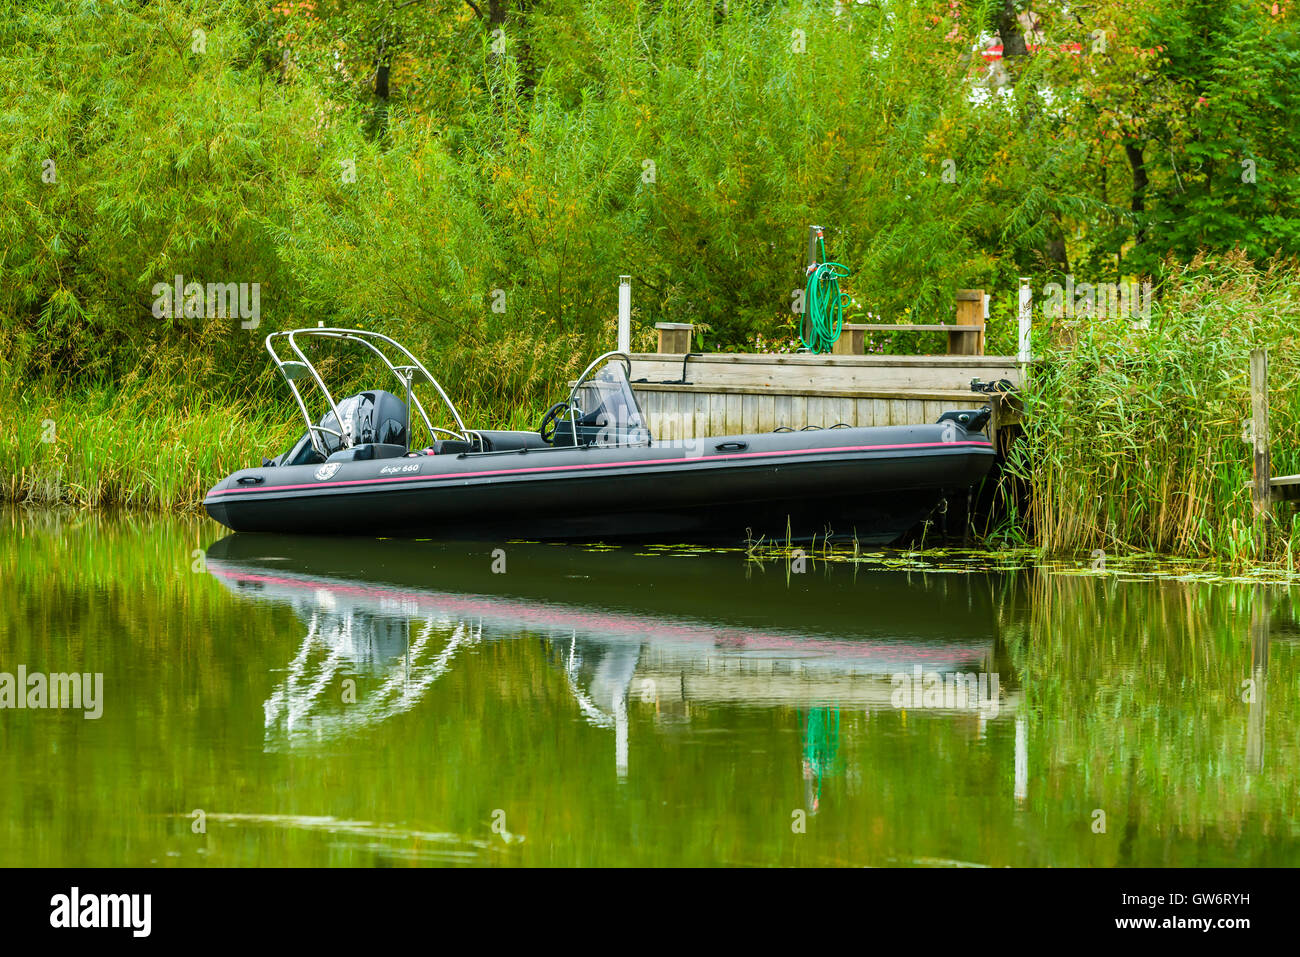 Kungalv, Sweden - September 8, 2016: The sales of new boats are rising. Here a Silver Marine expo 660 boat moored riverside at s Stock Photo